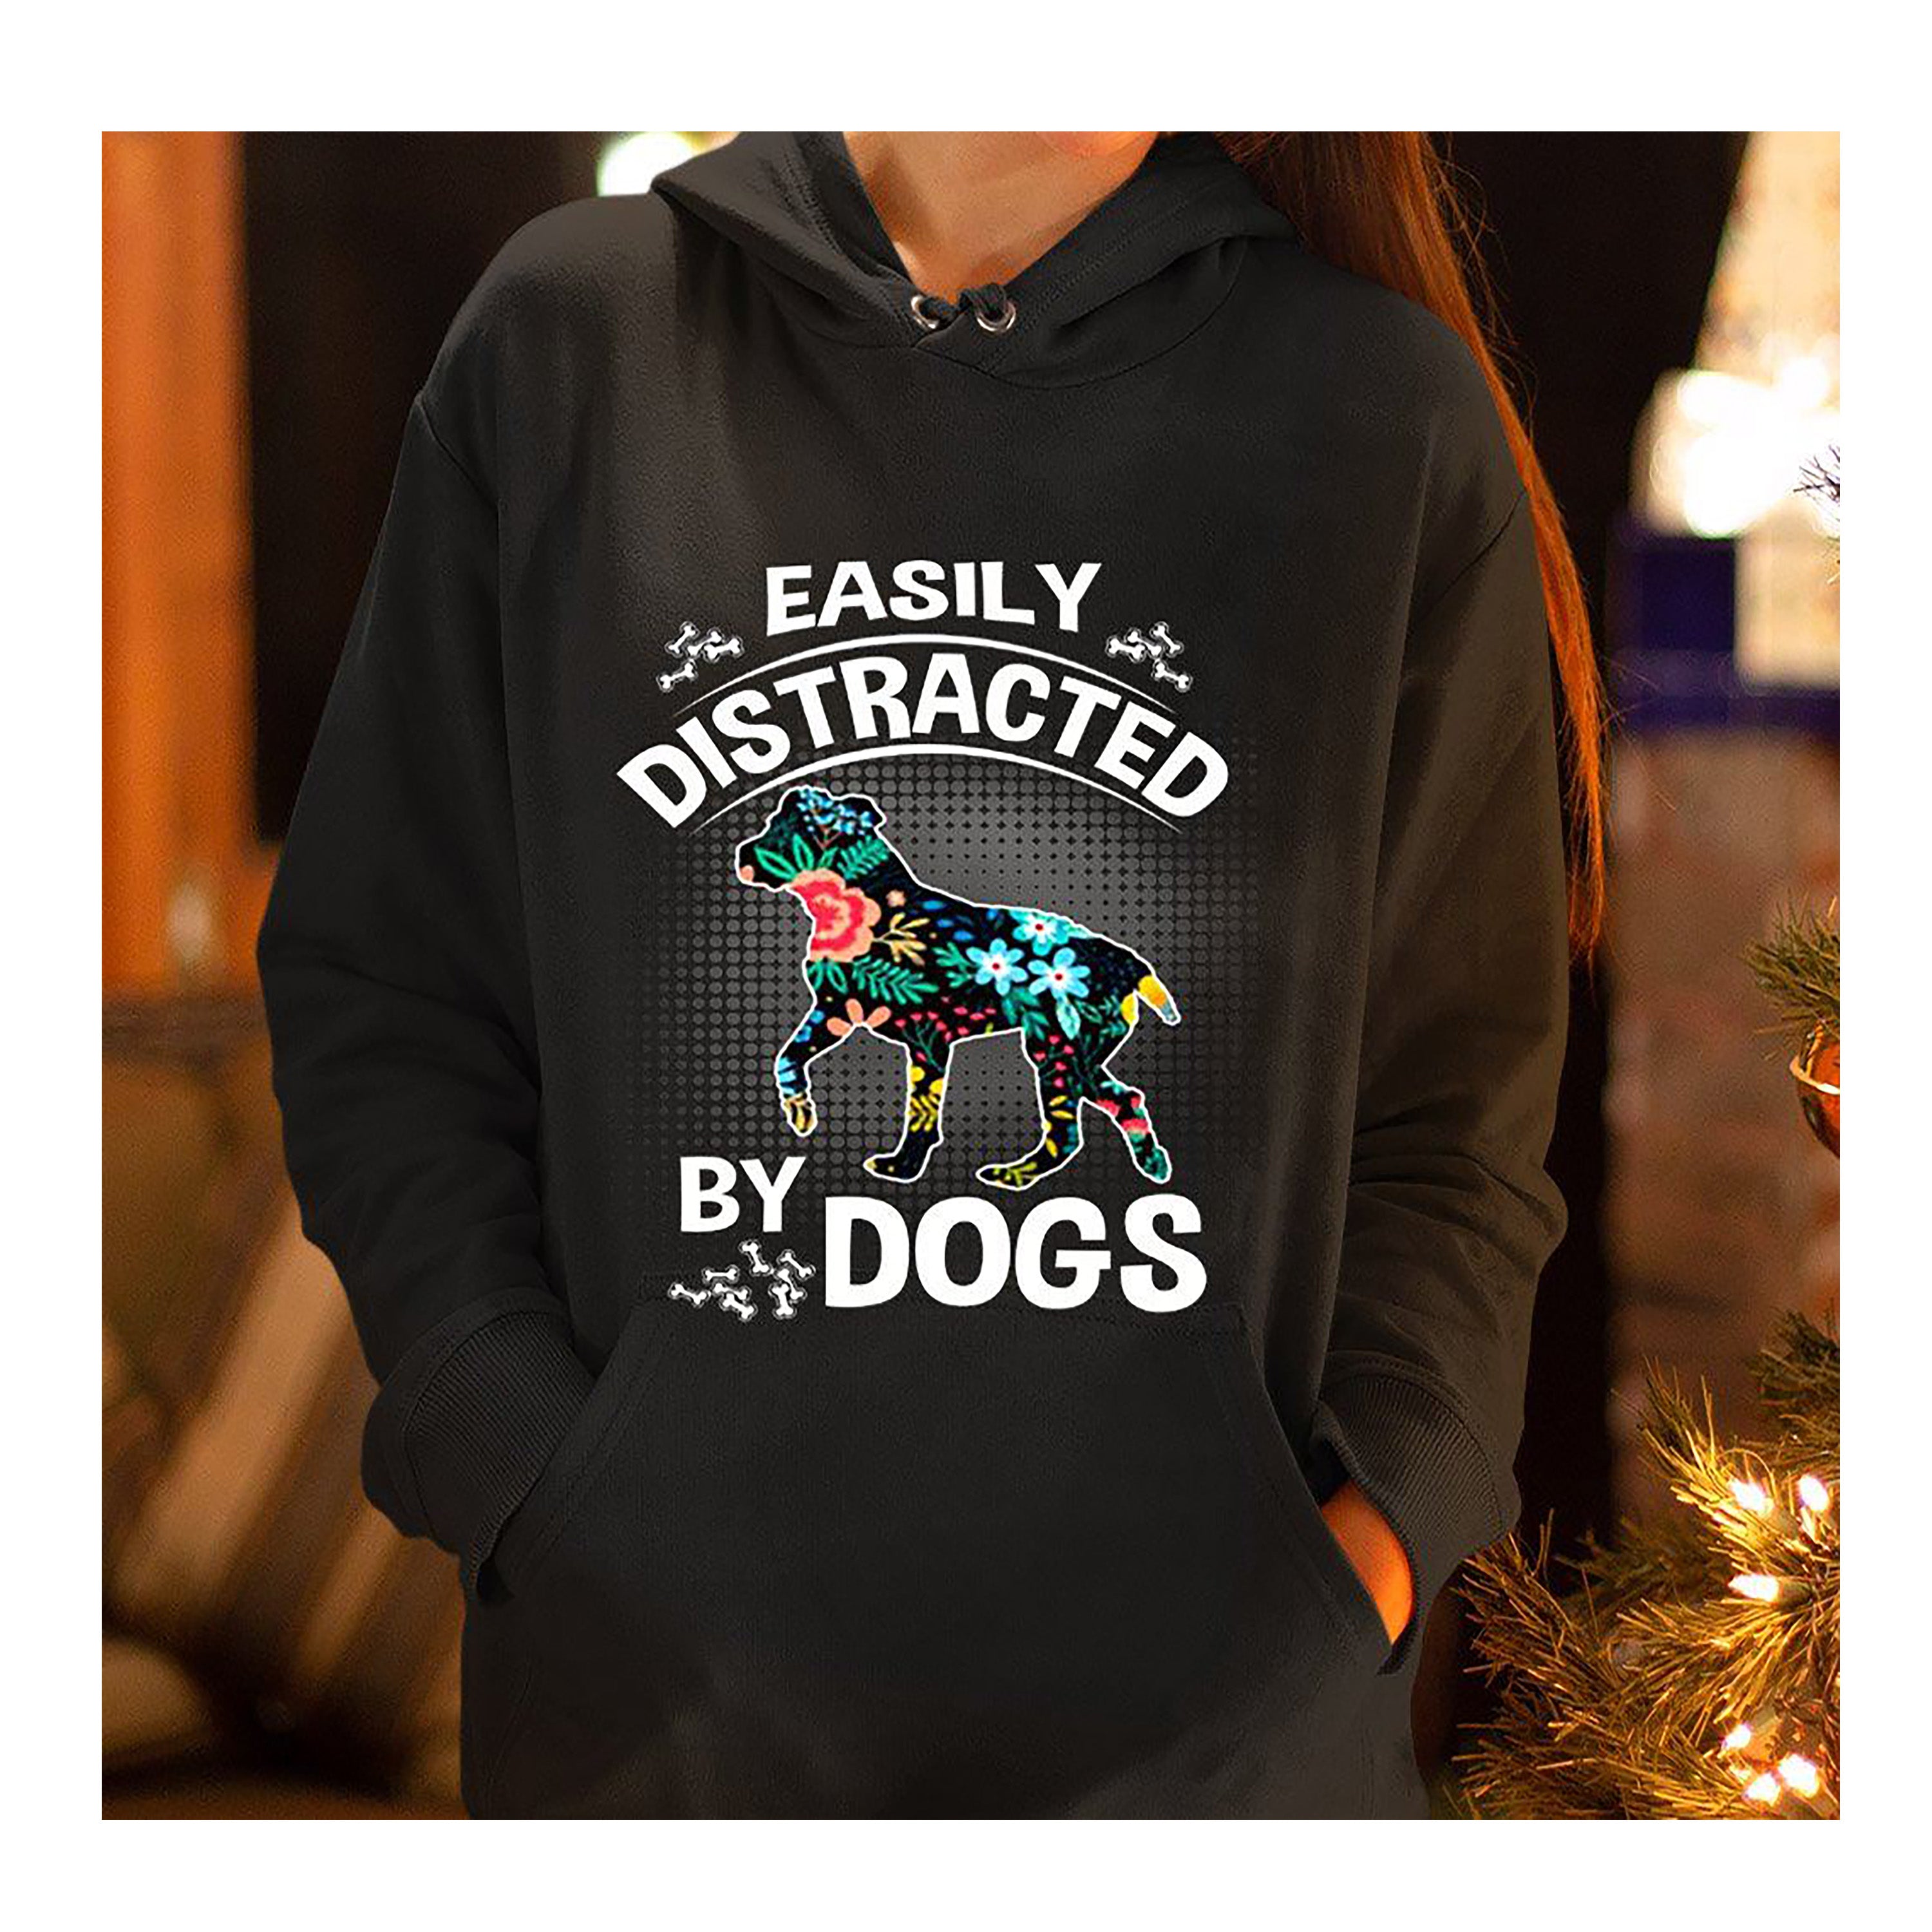 "Easily Distracted By Dogs"